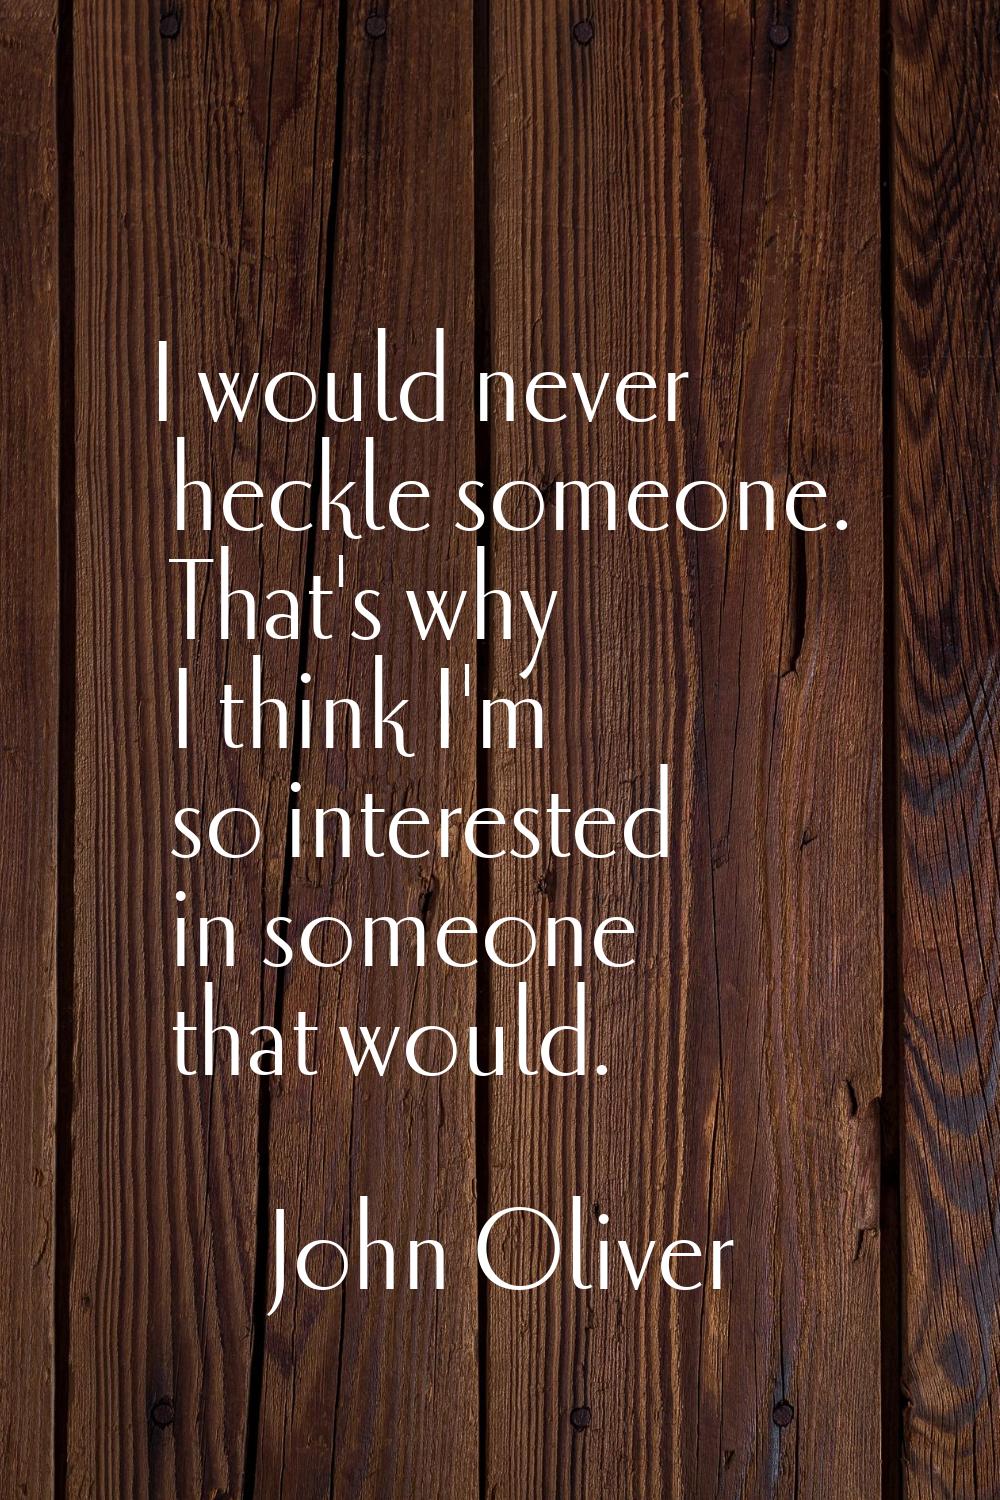 I would never heckle someone. That's why I think I'm so interested in someone that would.